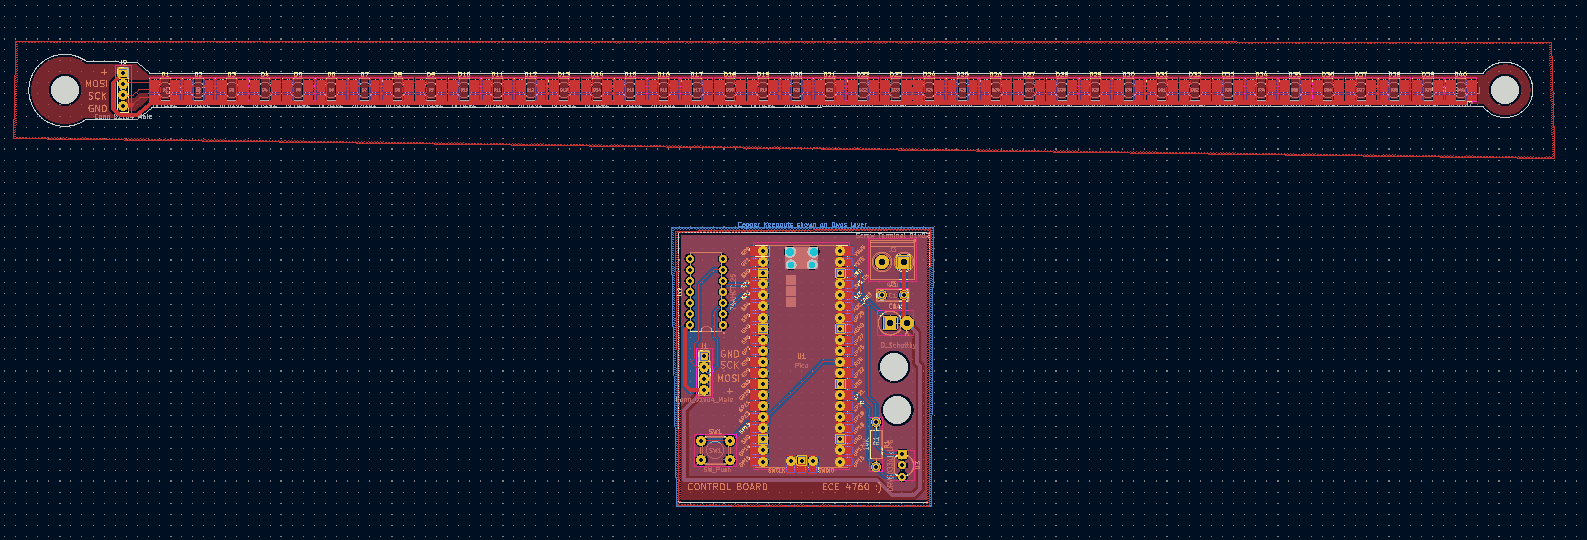 Our PCBs laid out in KiCad